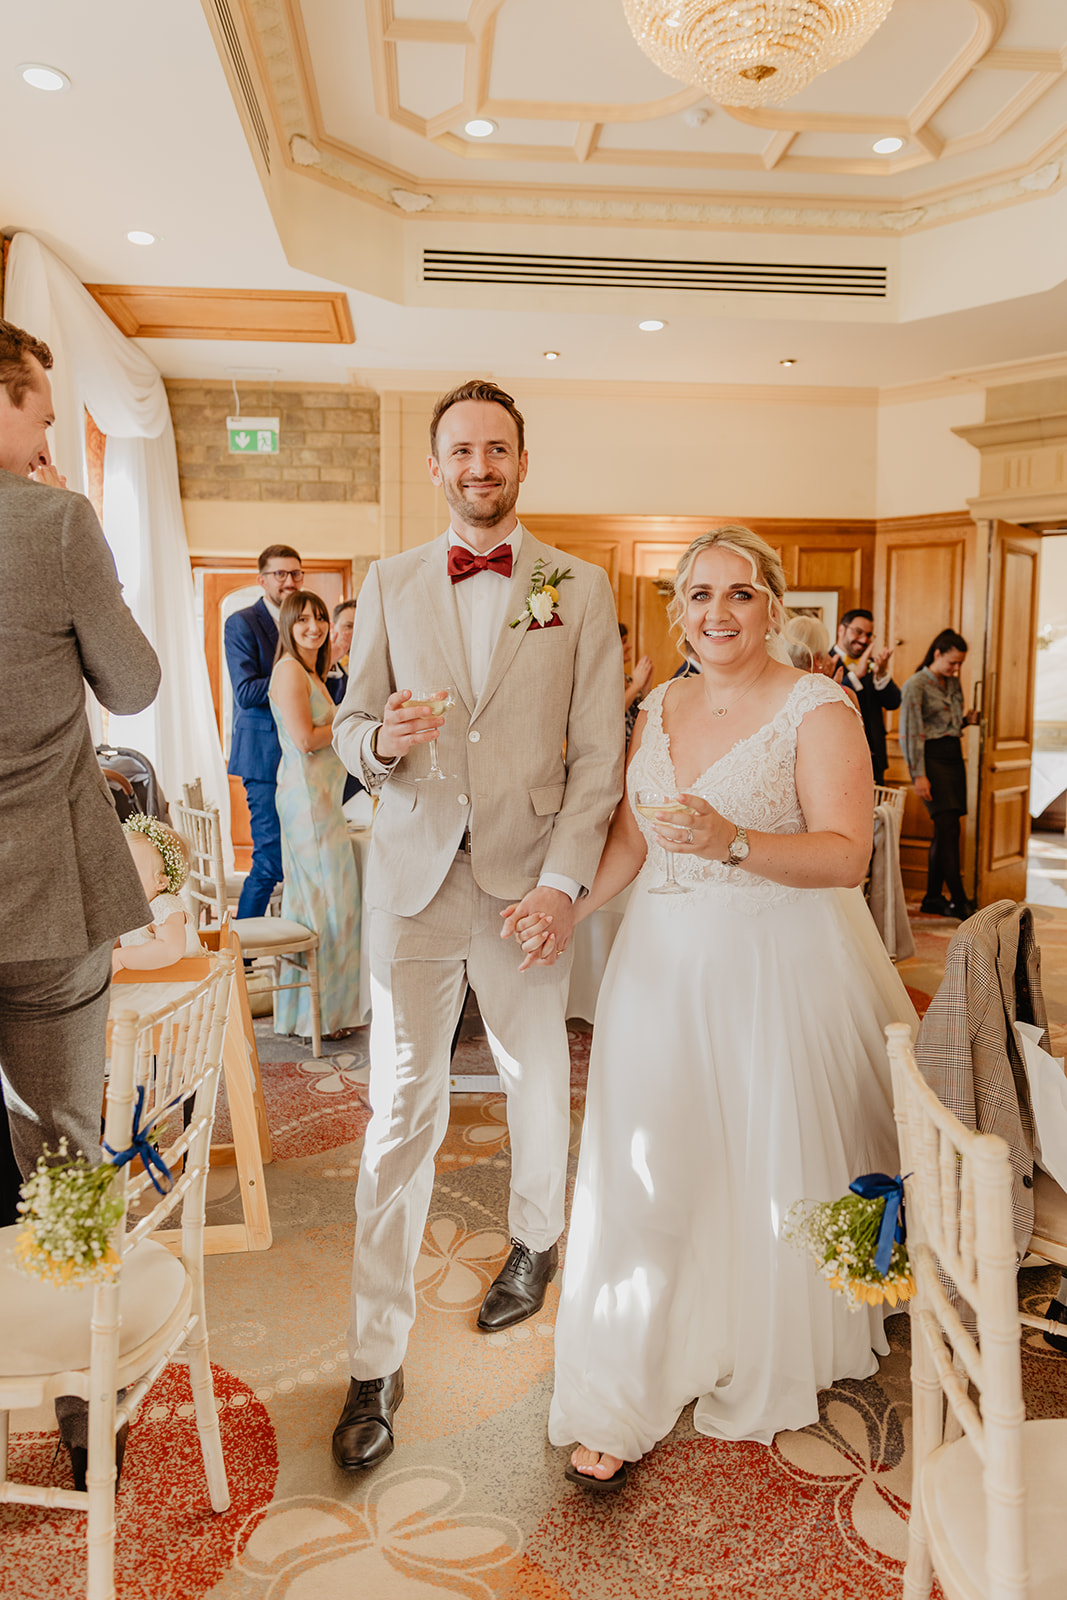 Bride and groom arriving at their reception at a South Lodge, Sussex Wedding. By Olive Joy Photography